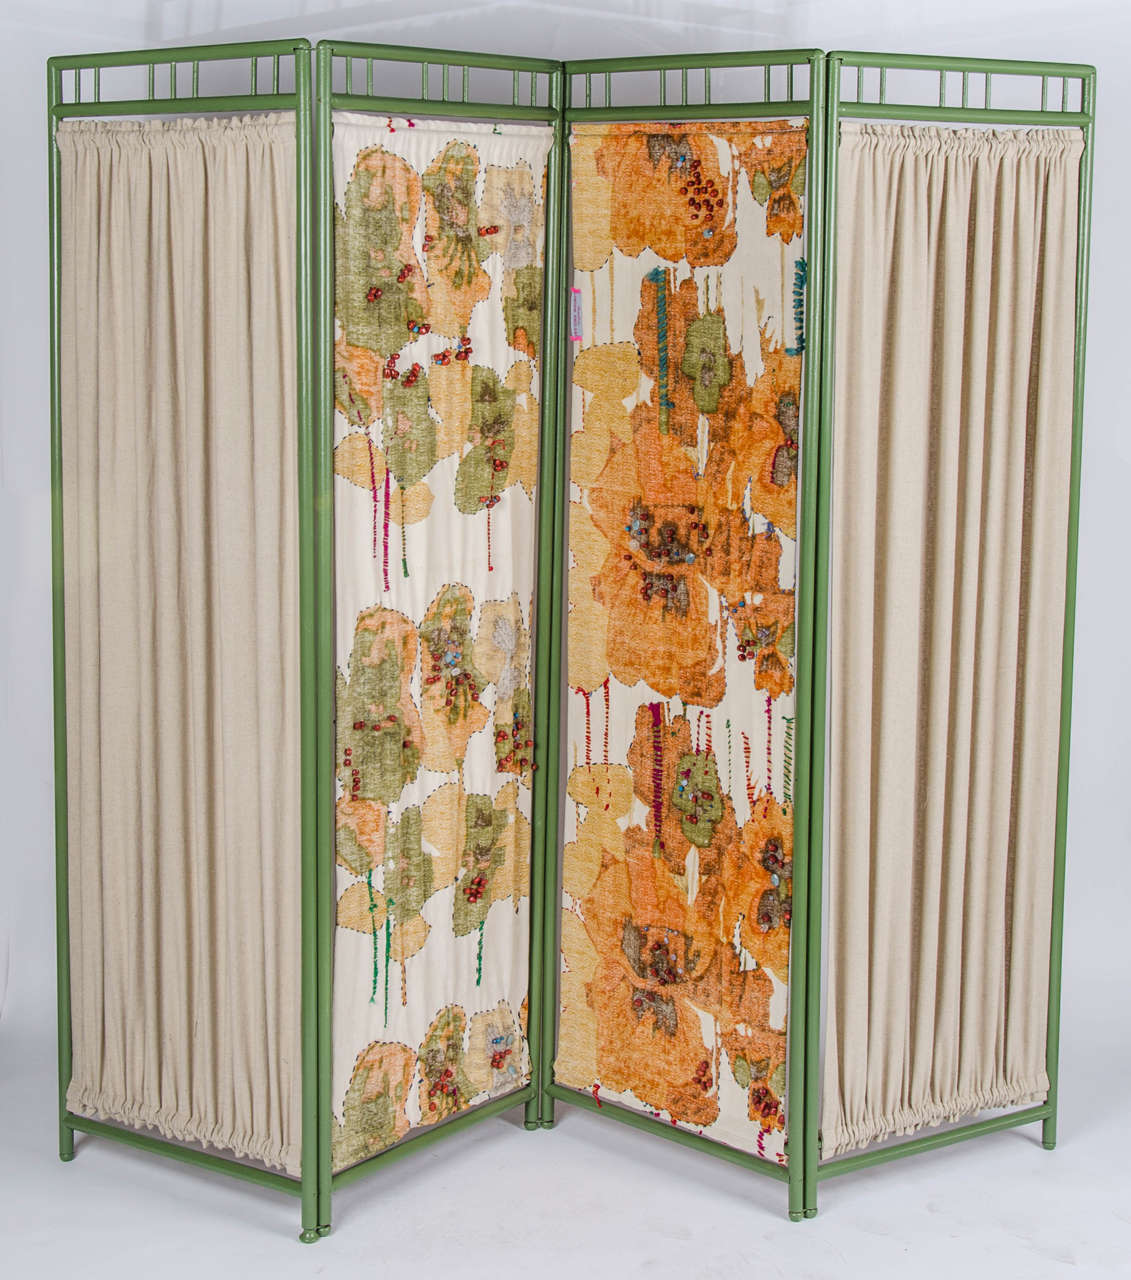 A beautiful early 20th-century wooden screen, re-upholstered with a floral detailed fabric from the 1970s.

Origin UK. Maker unknown.